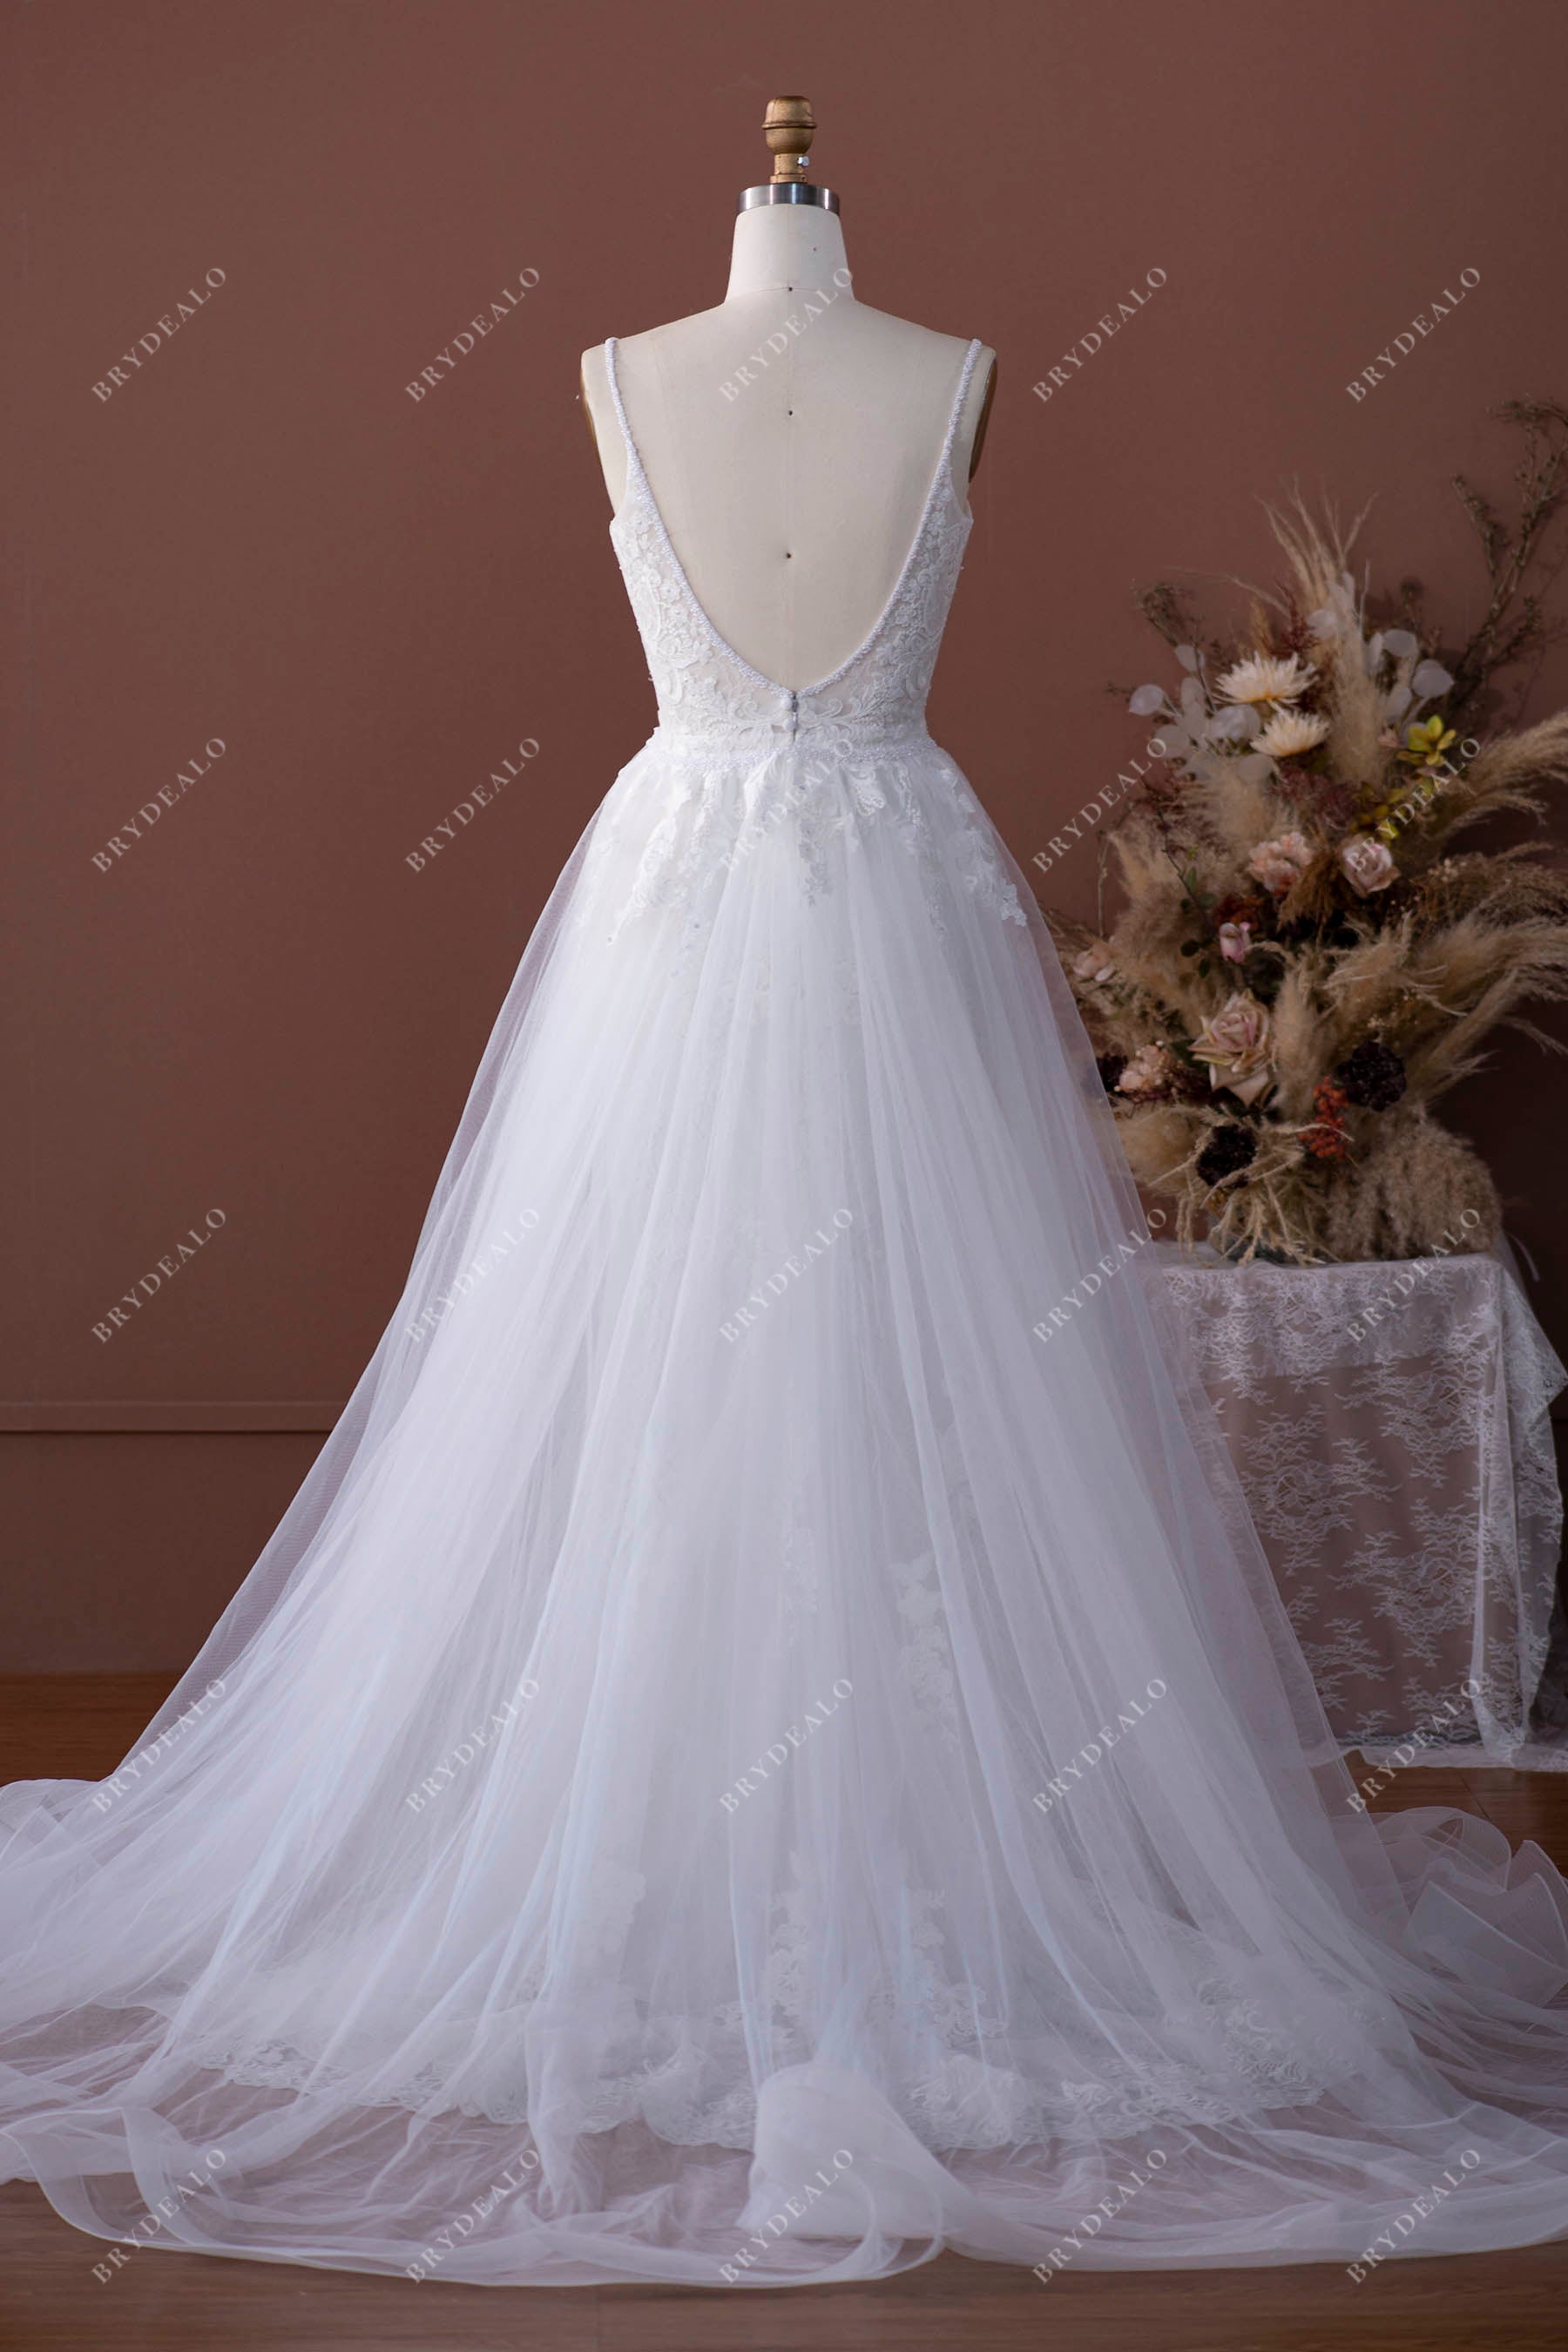 Beaded Lace Halter Bridal Dress with Detachable Overskirt - VQ